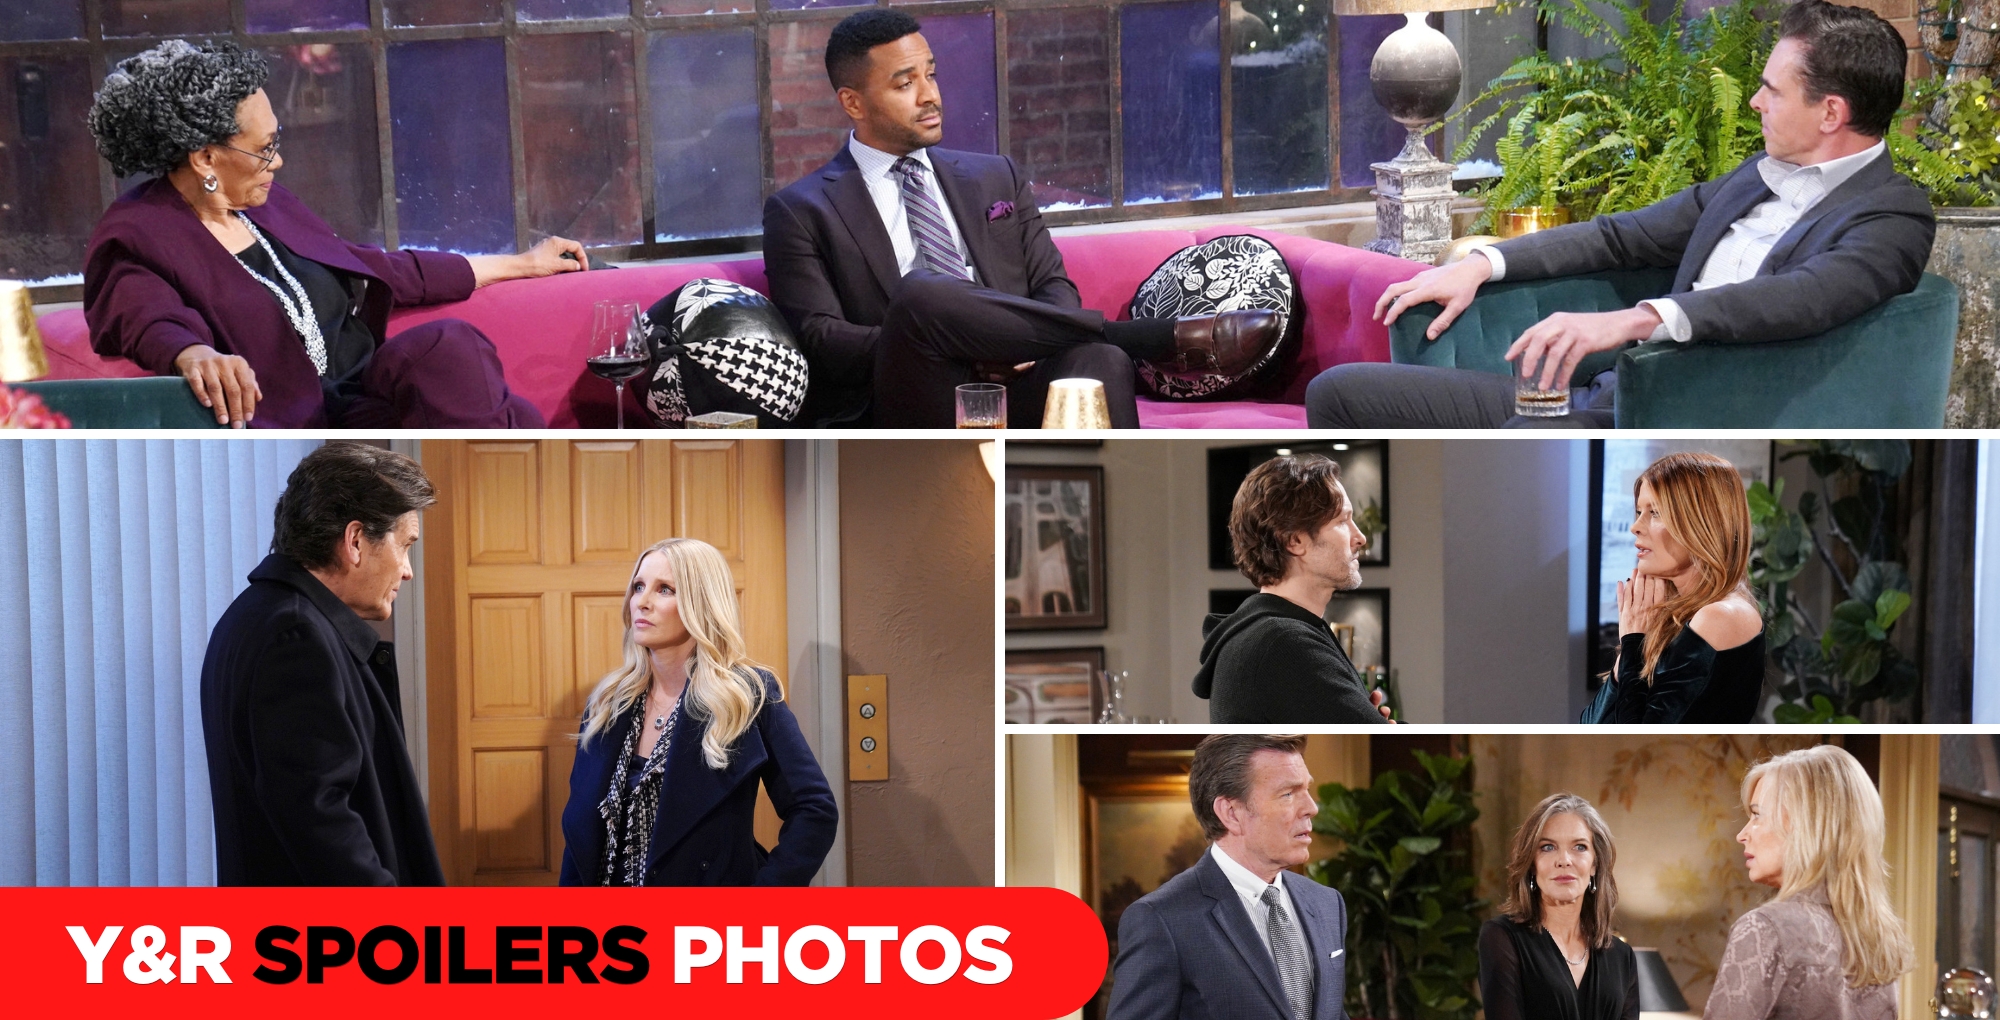 y&r spoilers photos for episode # 12804 collage.